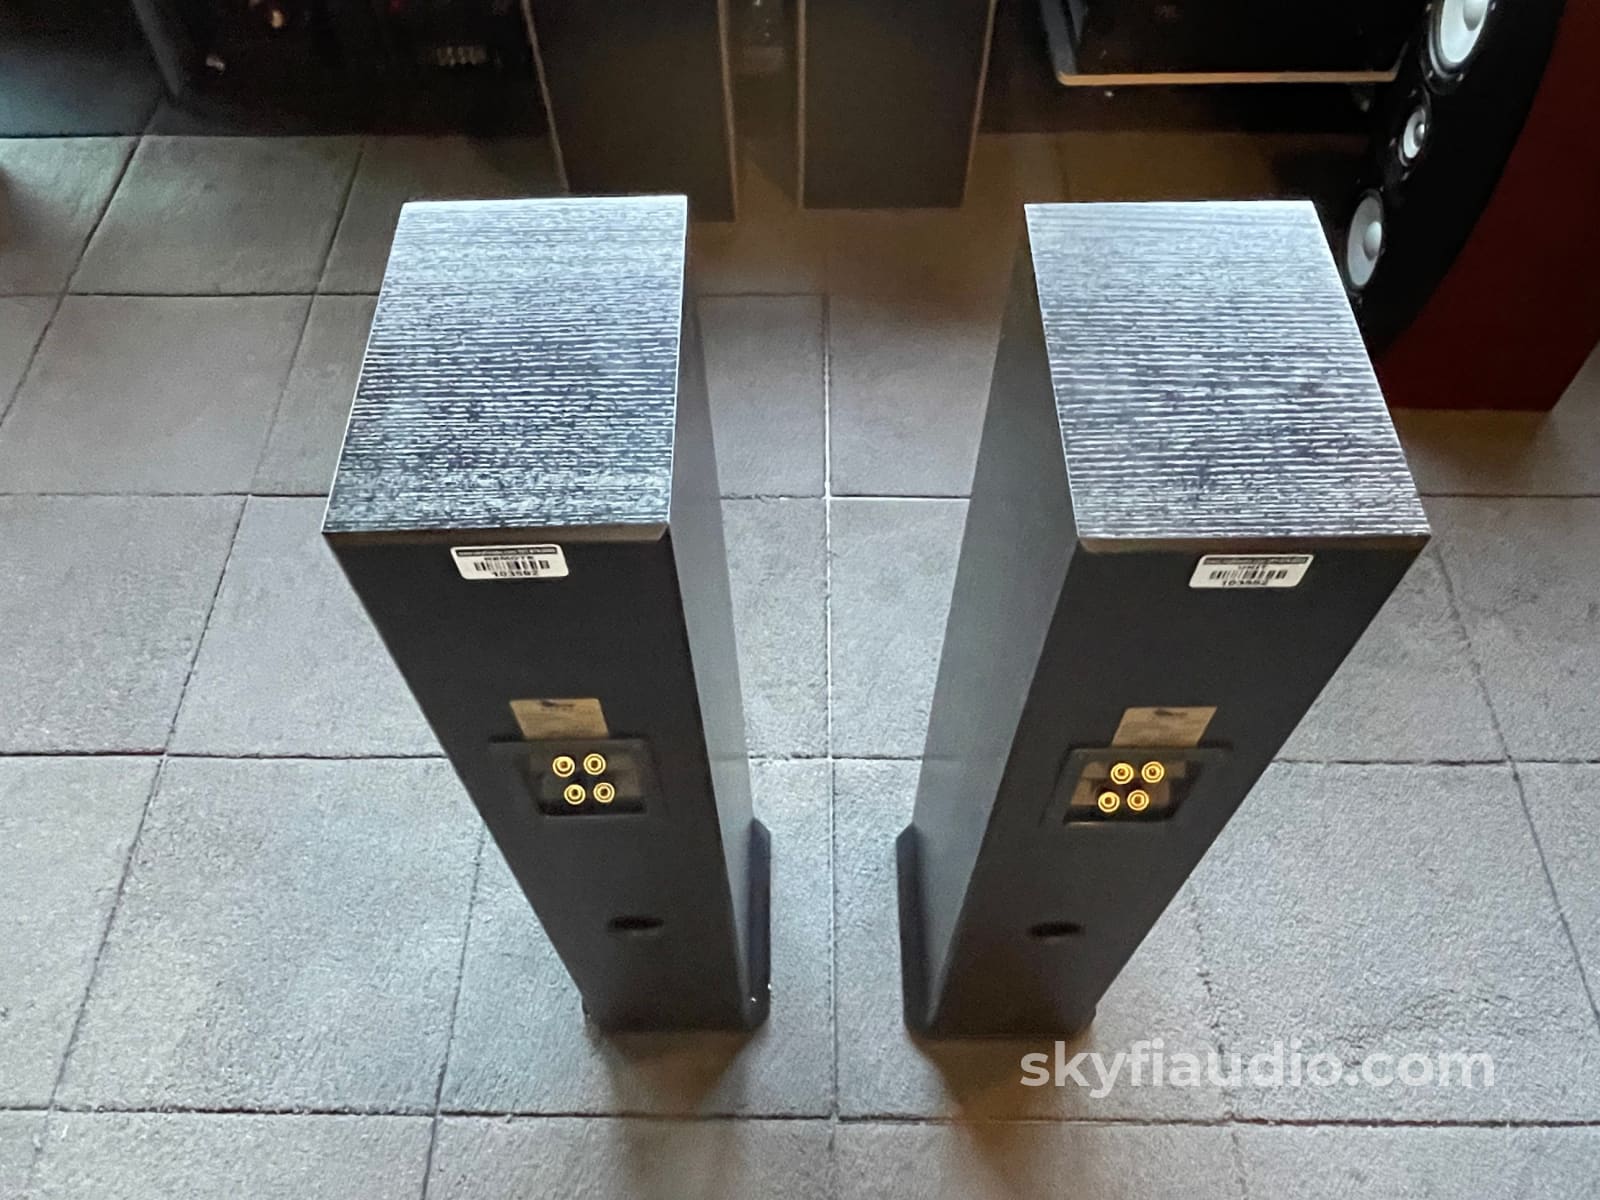 Totem Sttaf Floorstanding Speakers - Big Sound From A Small Box!